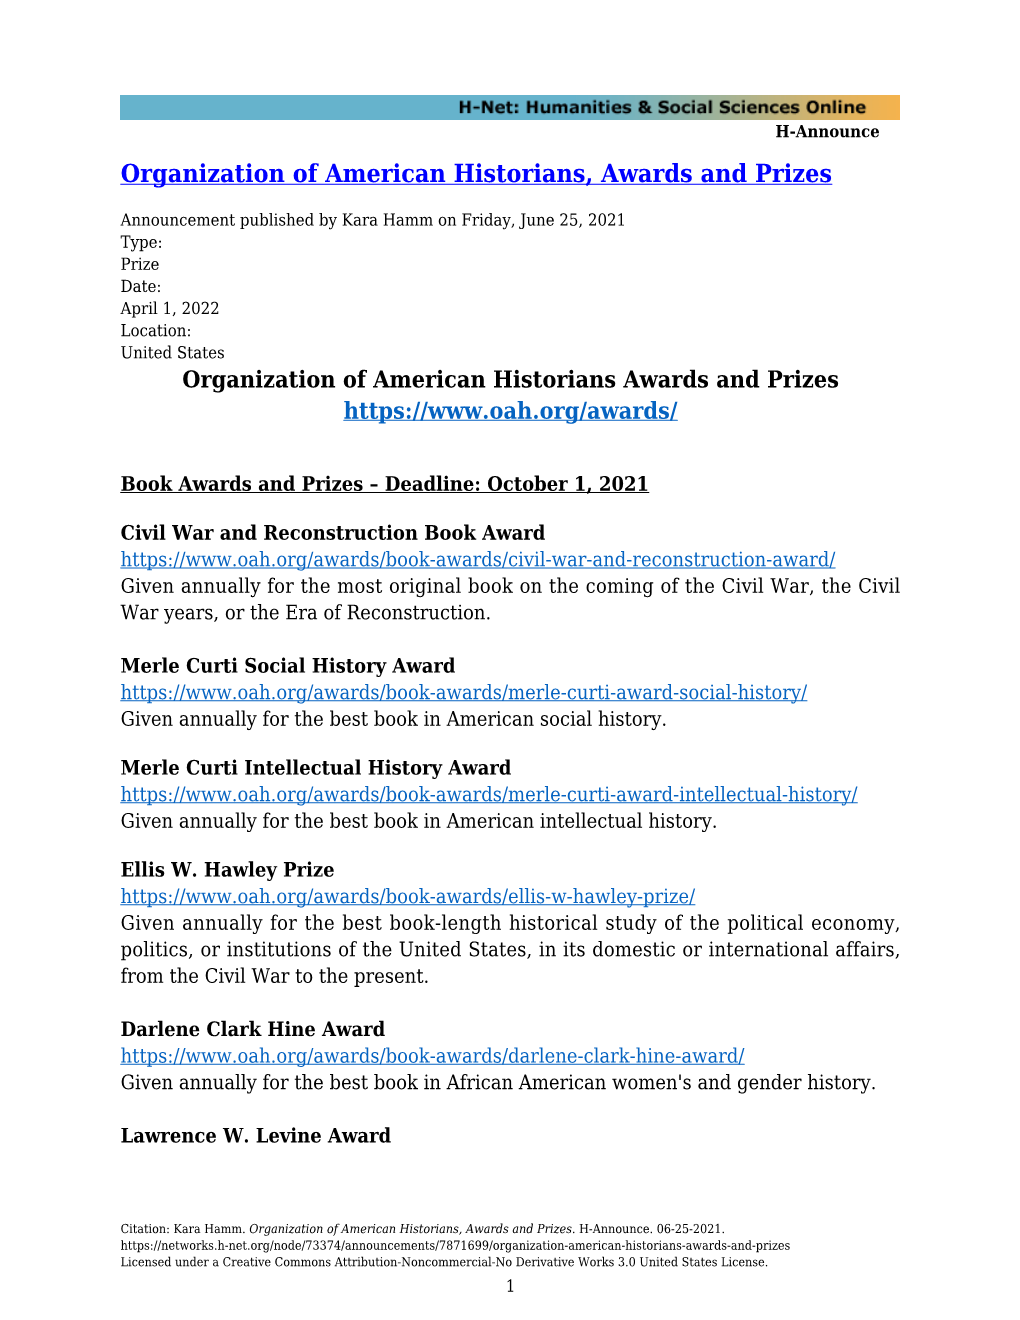 Organization of American Historians, Awards and Prizes